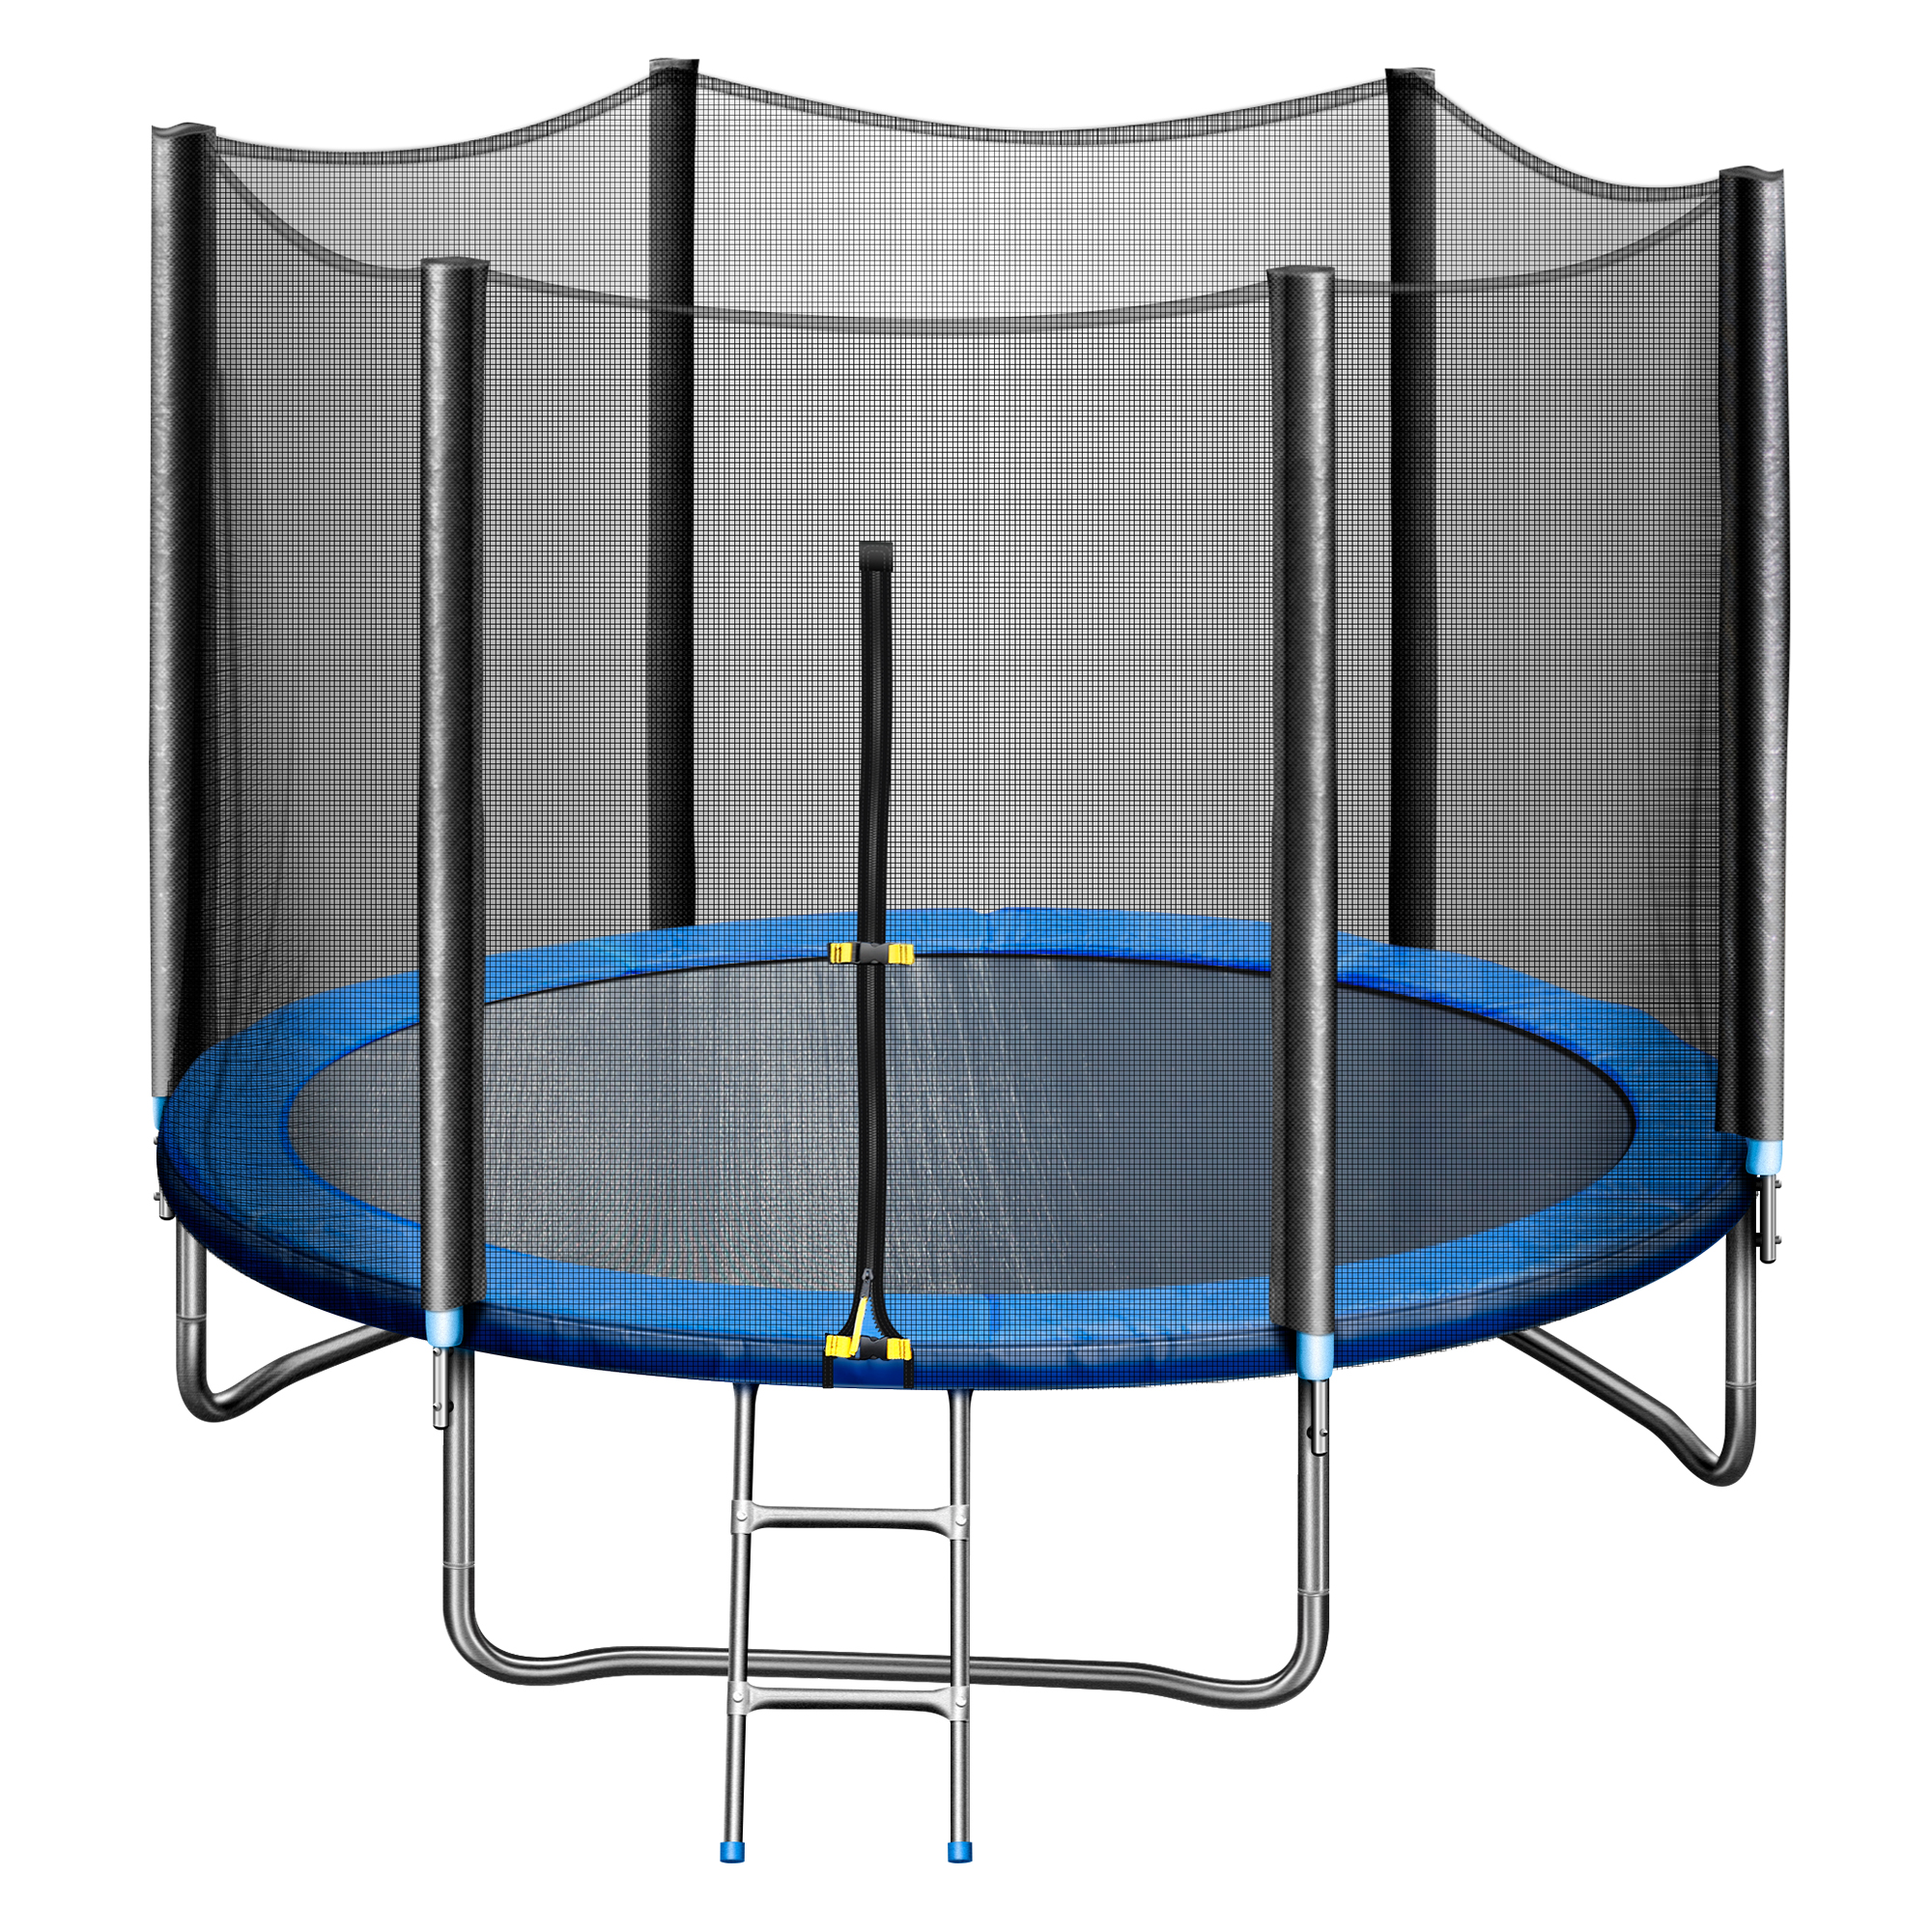 10FT Recreational Trampoline with Safe Enclosure Net, Waterproof Jumping Mat,Simple Ladder,Max Weight Capacity 330 LB for 3-4 Kids,Blue-Boyel Living